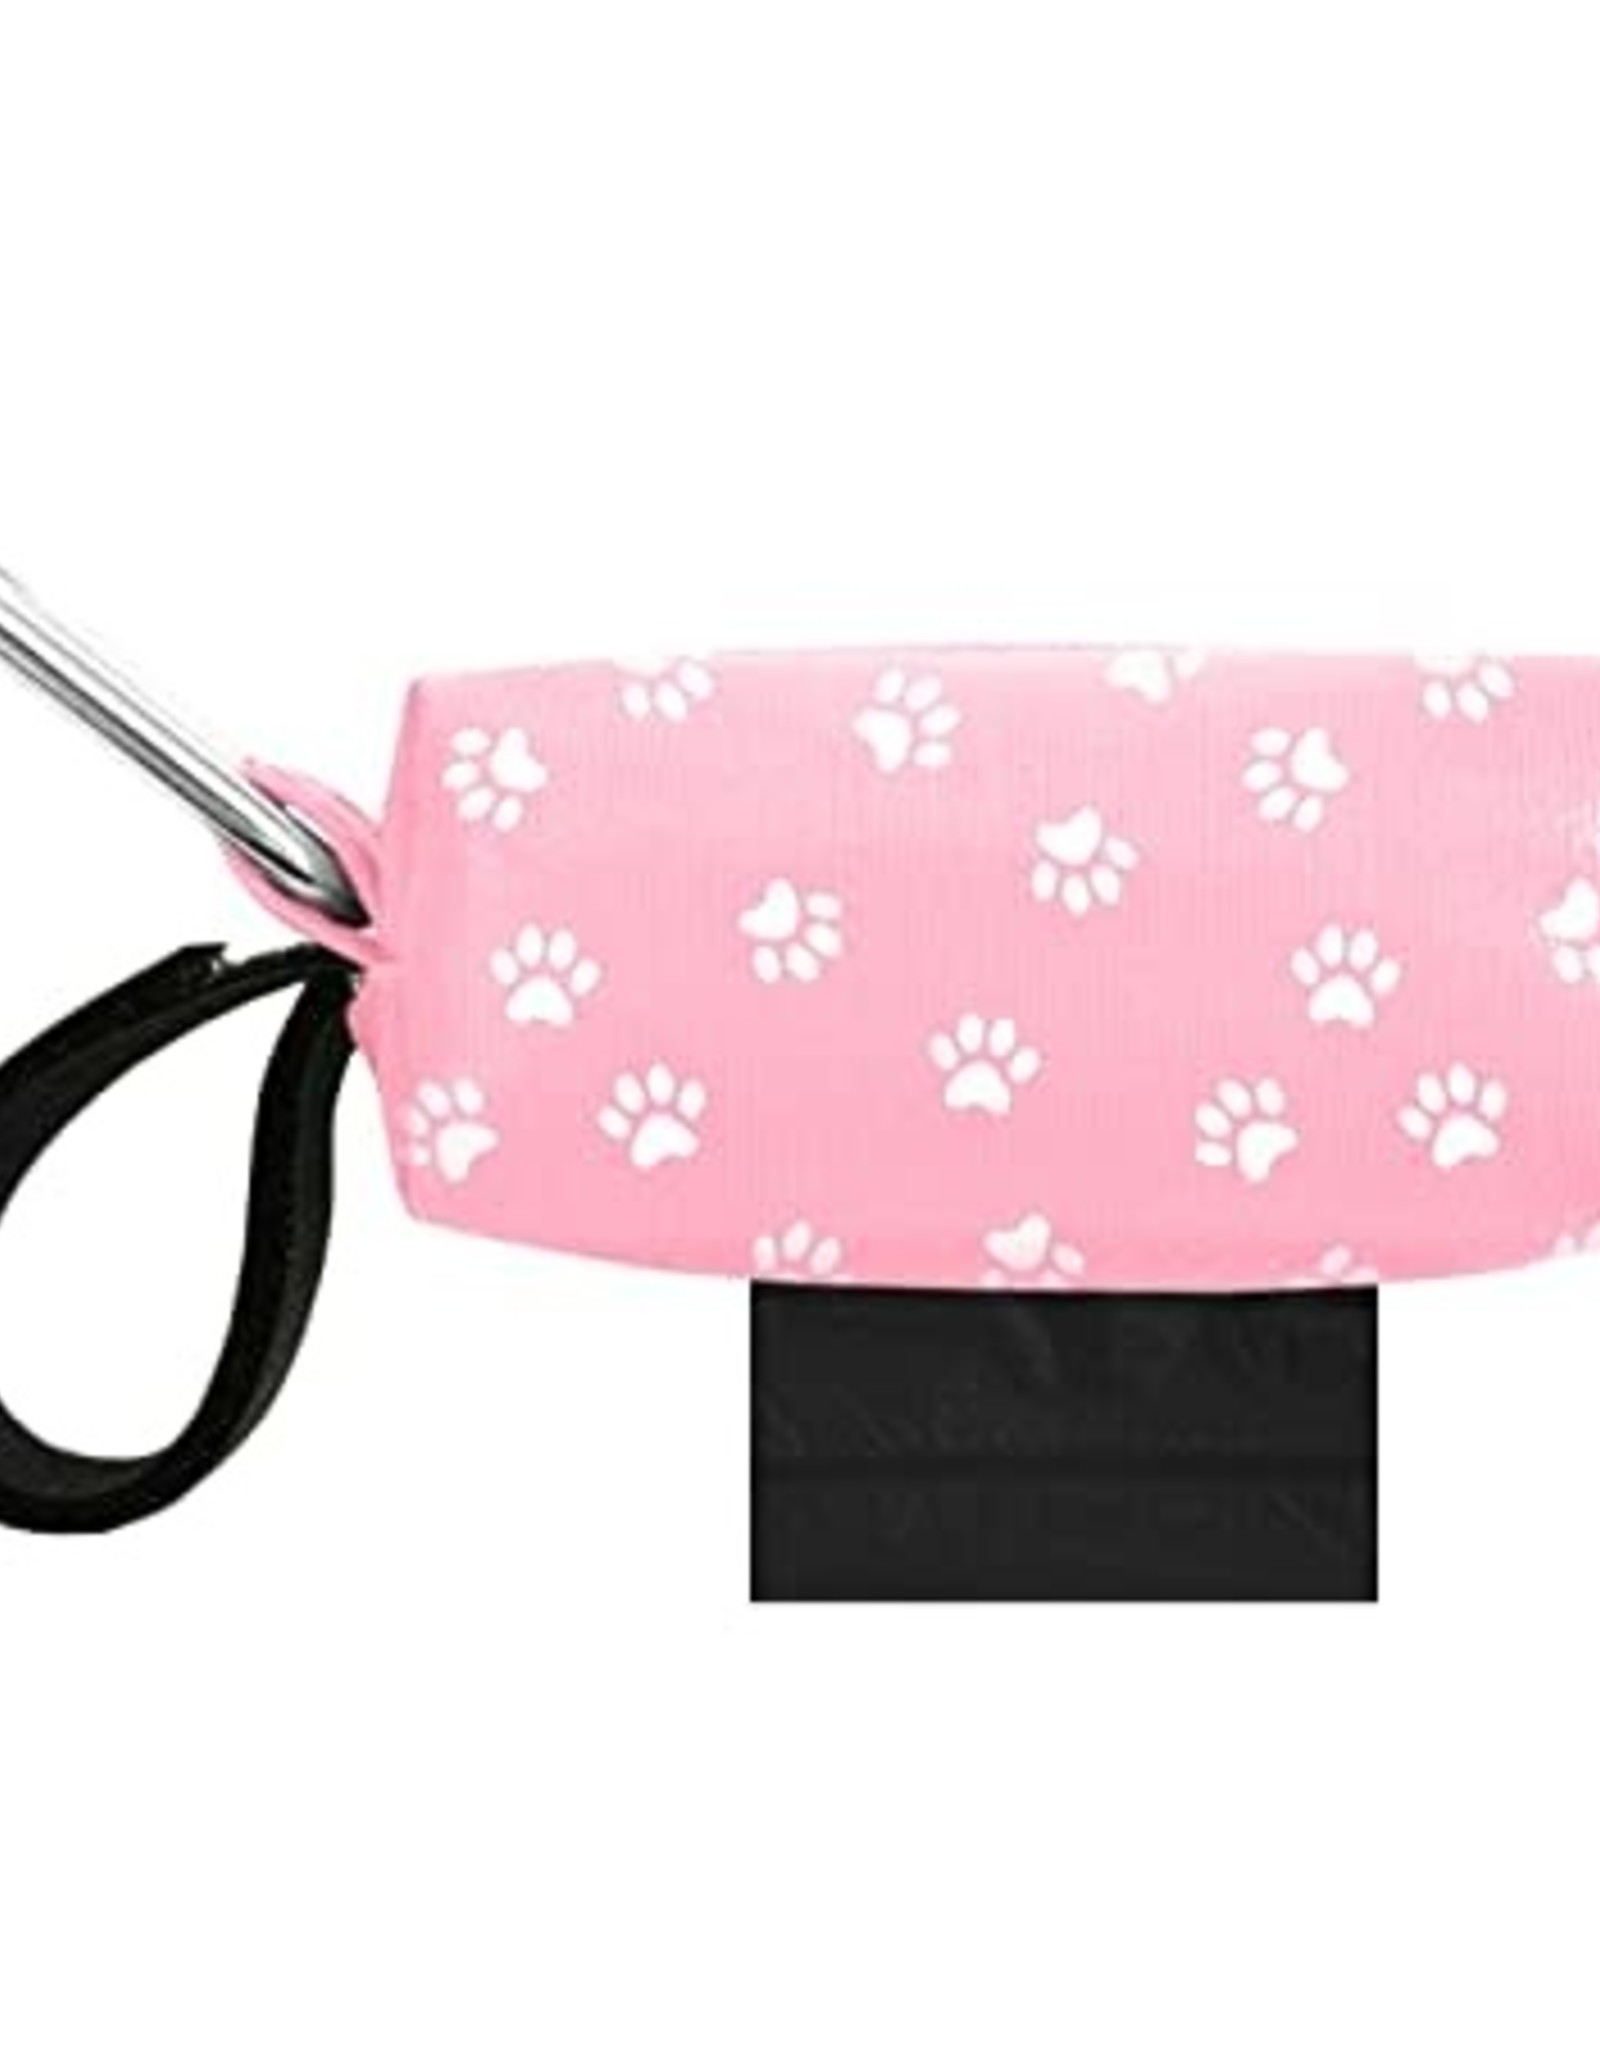 Doggie Walk Bags - Multiple Colors Available